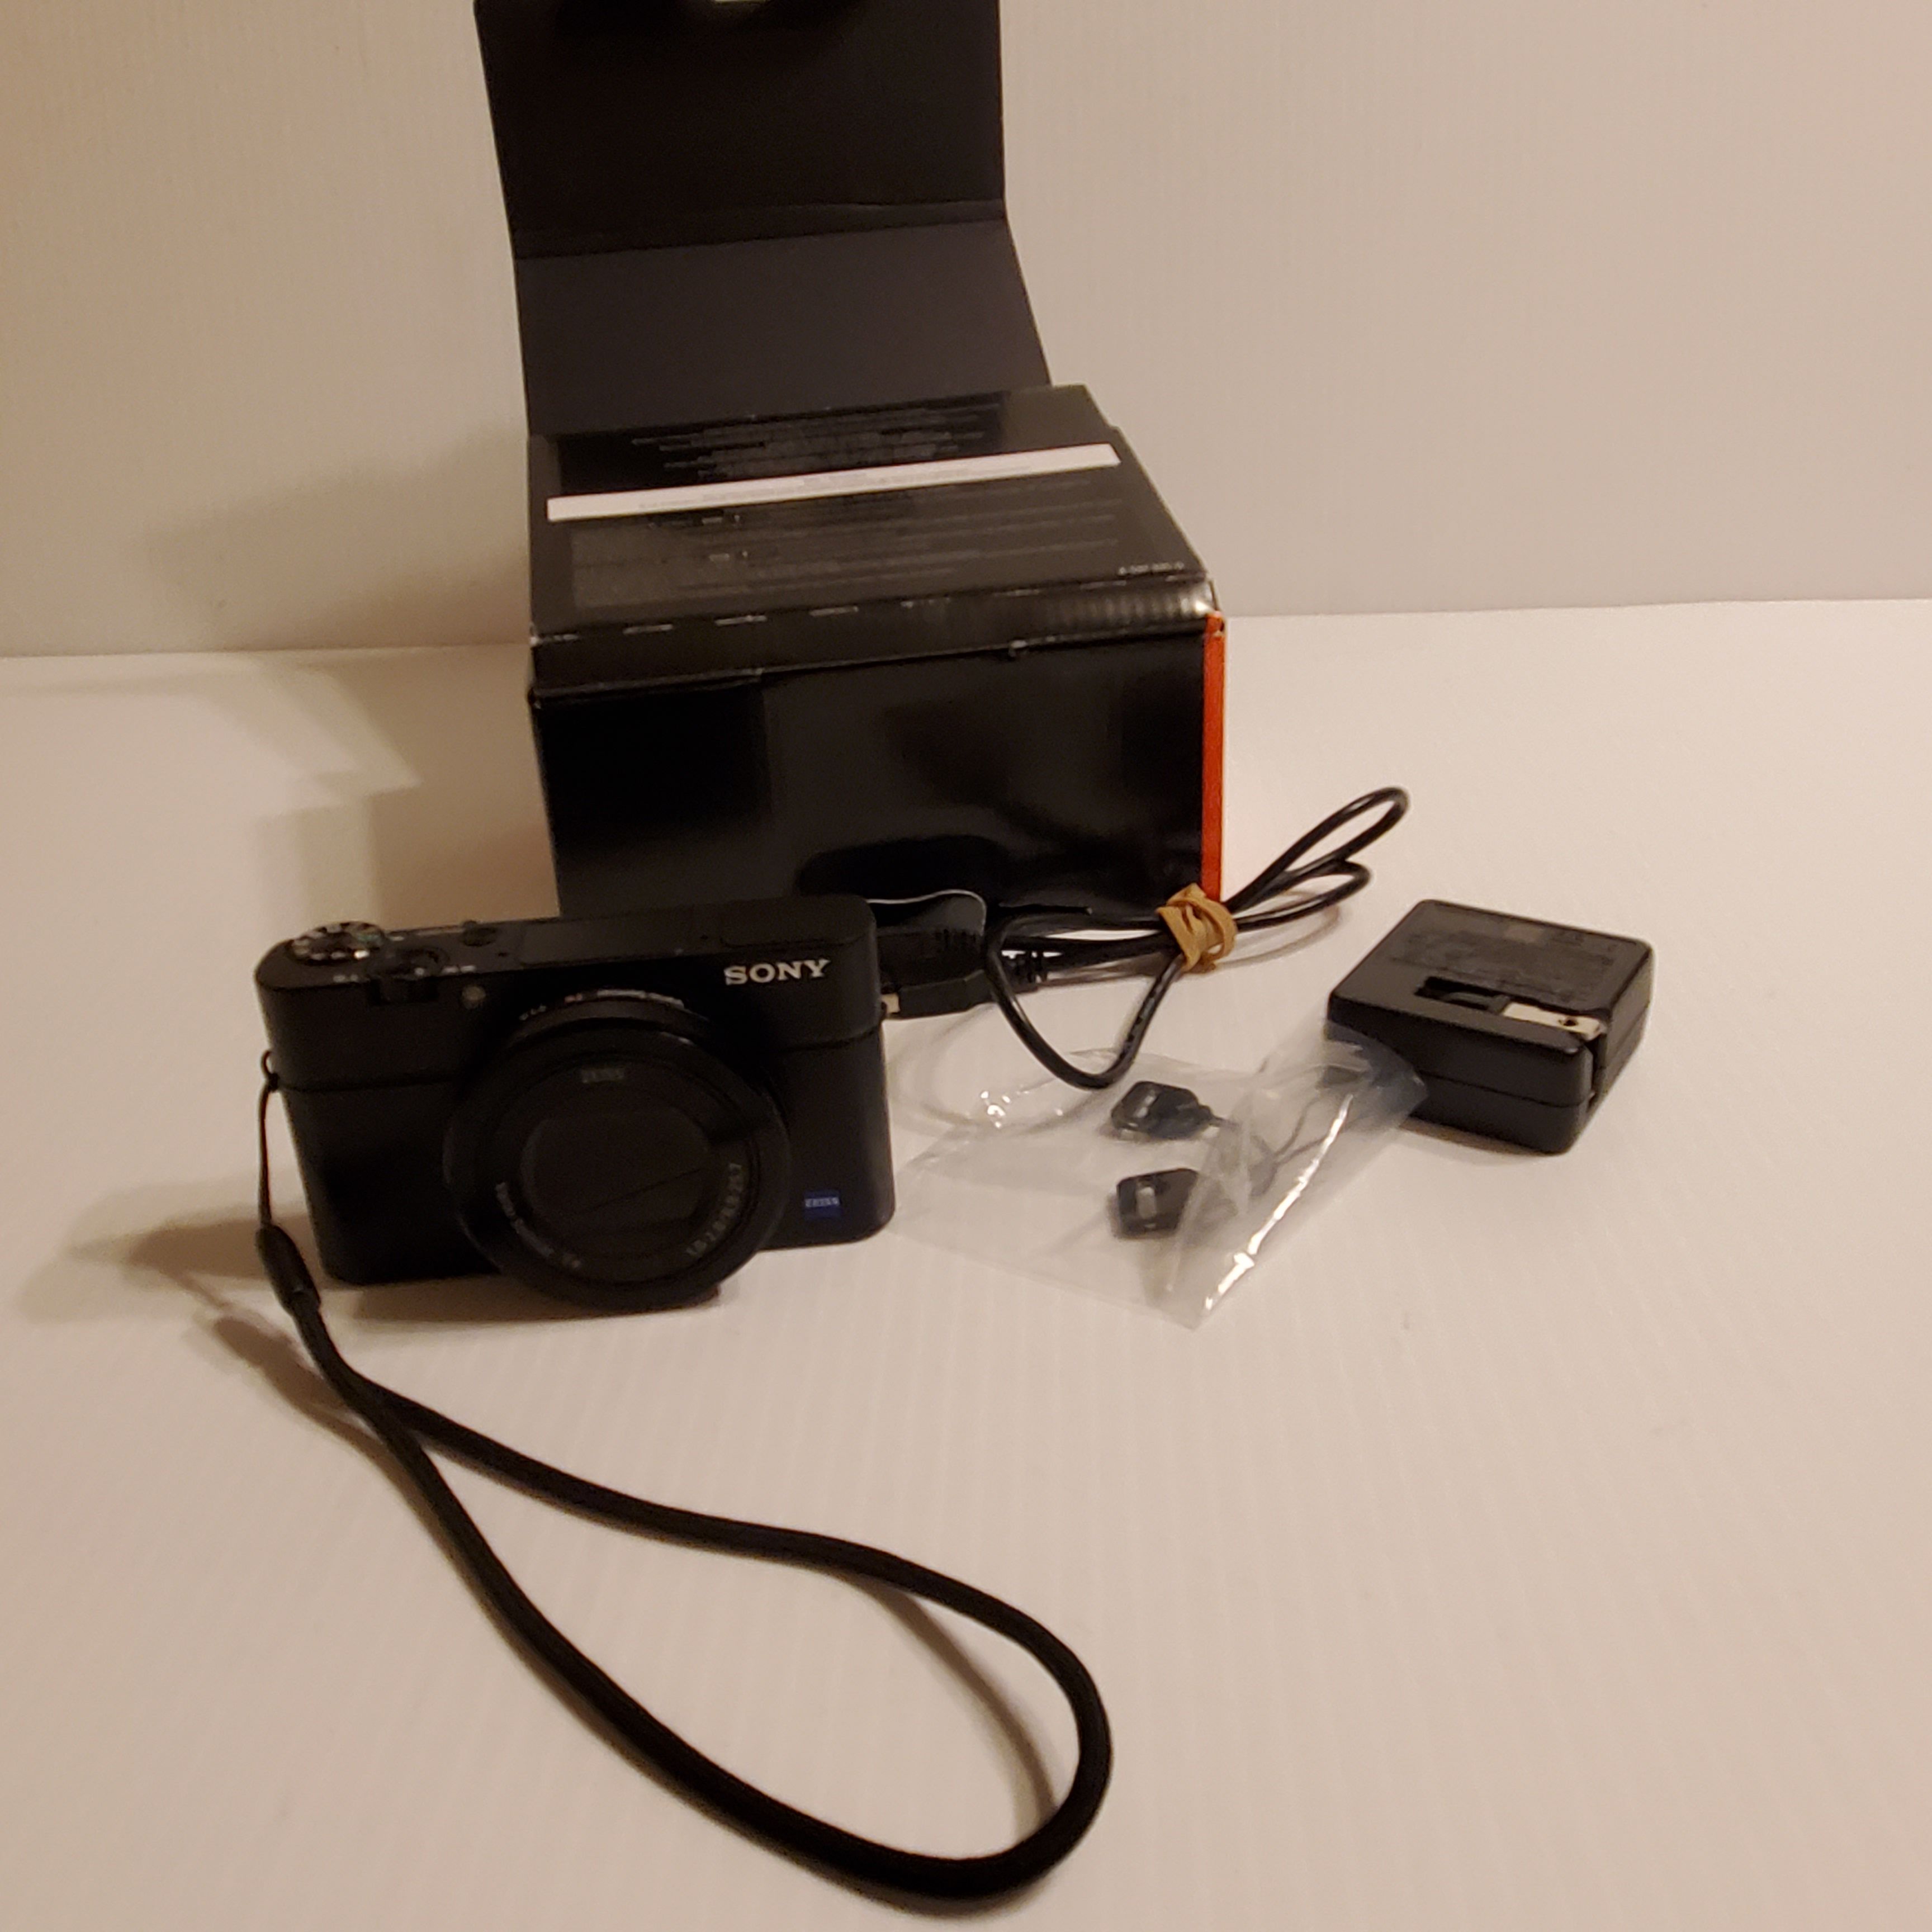 Sony DSC-RX100M3 Digital Camera with accessories - charger and battery. Comes with original box.